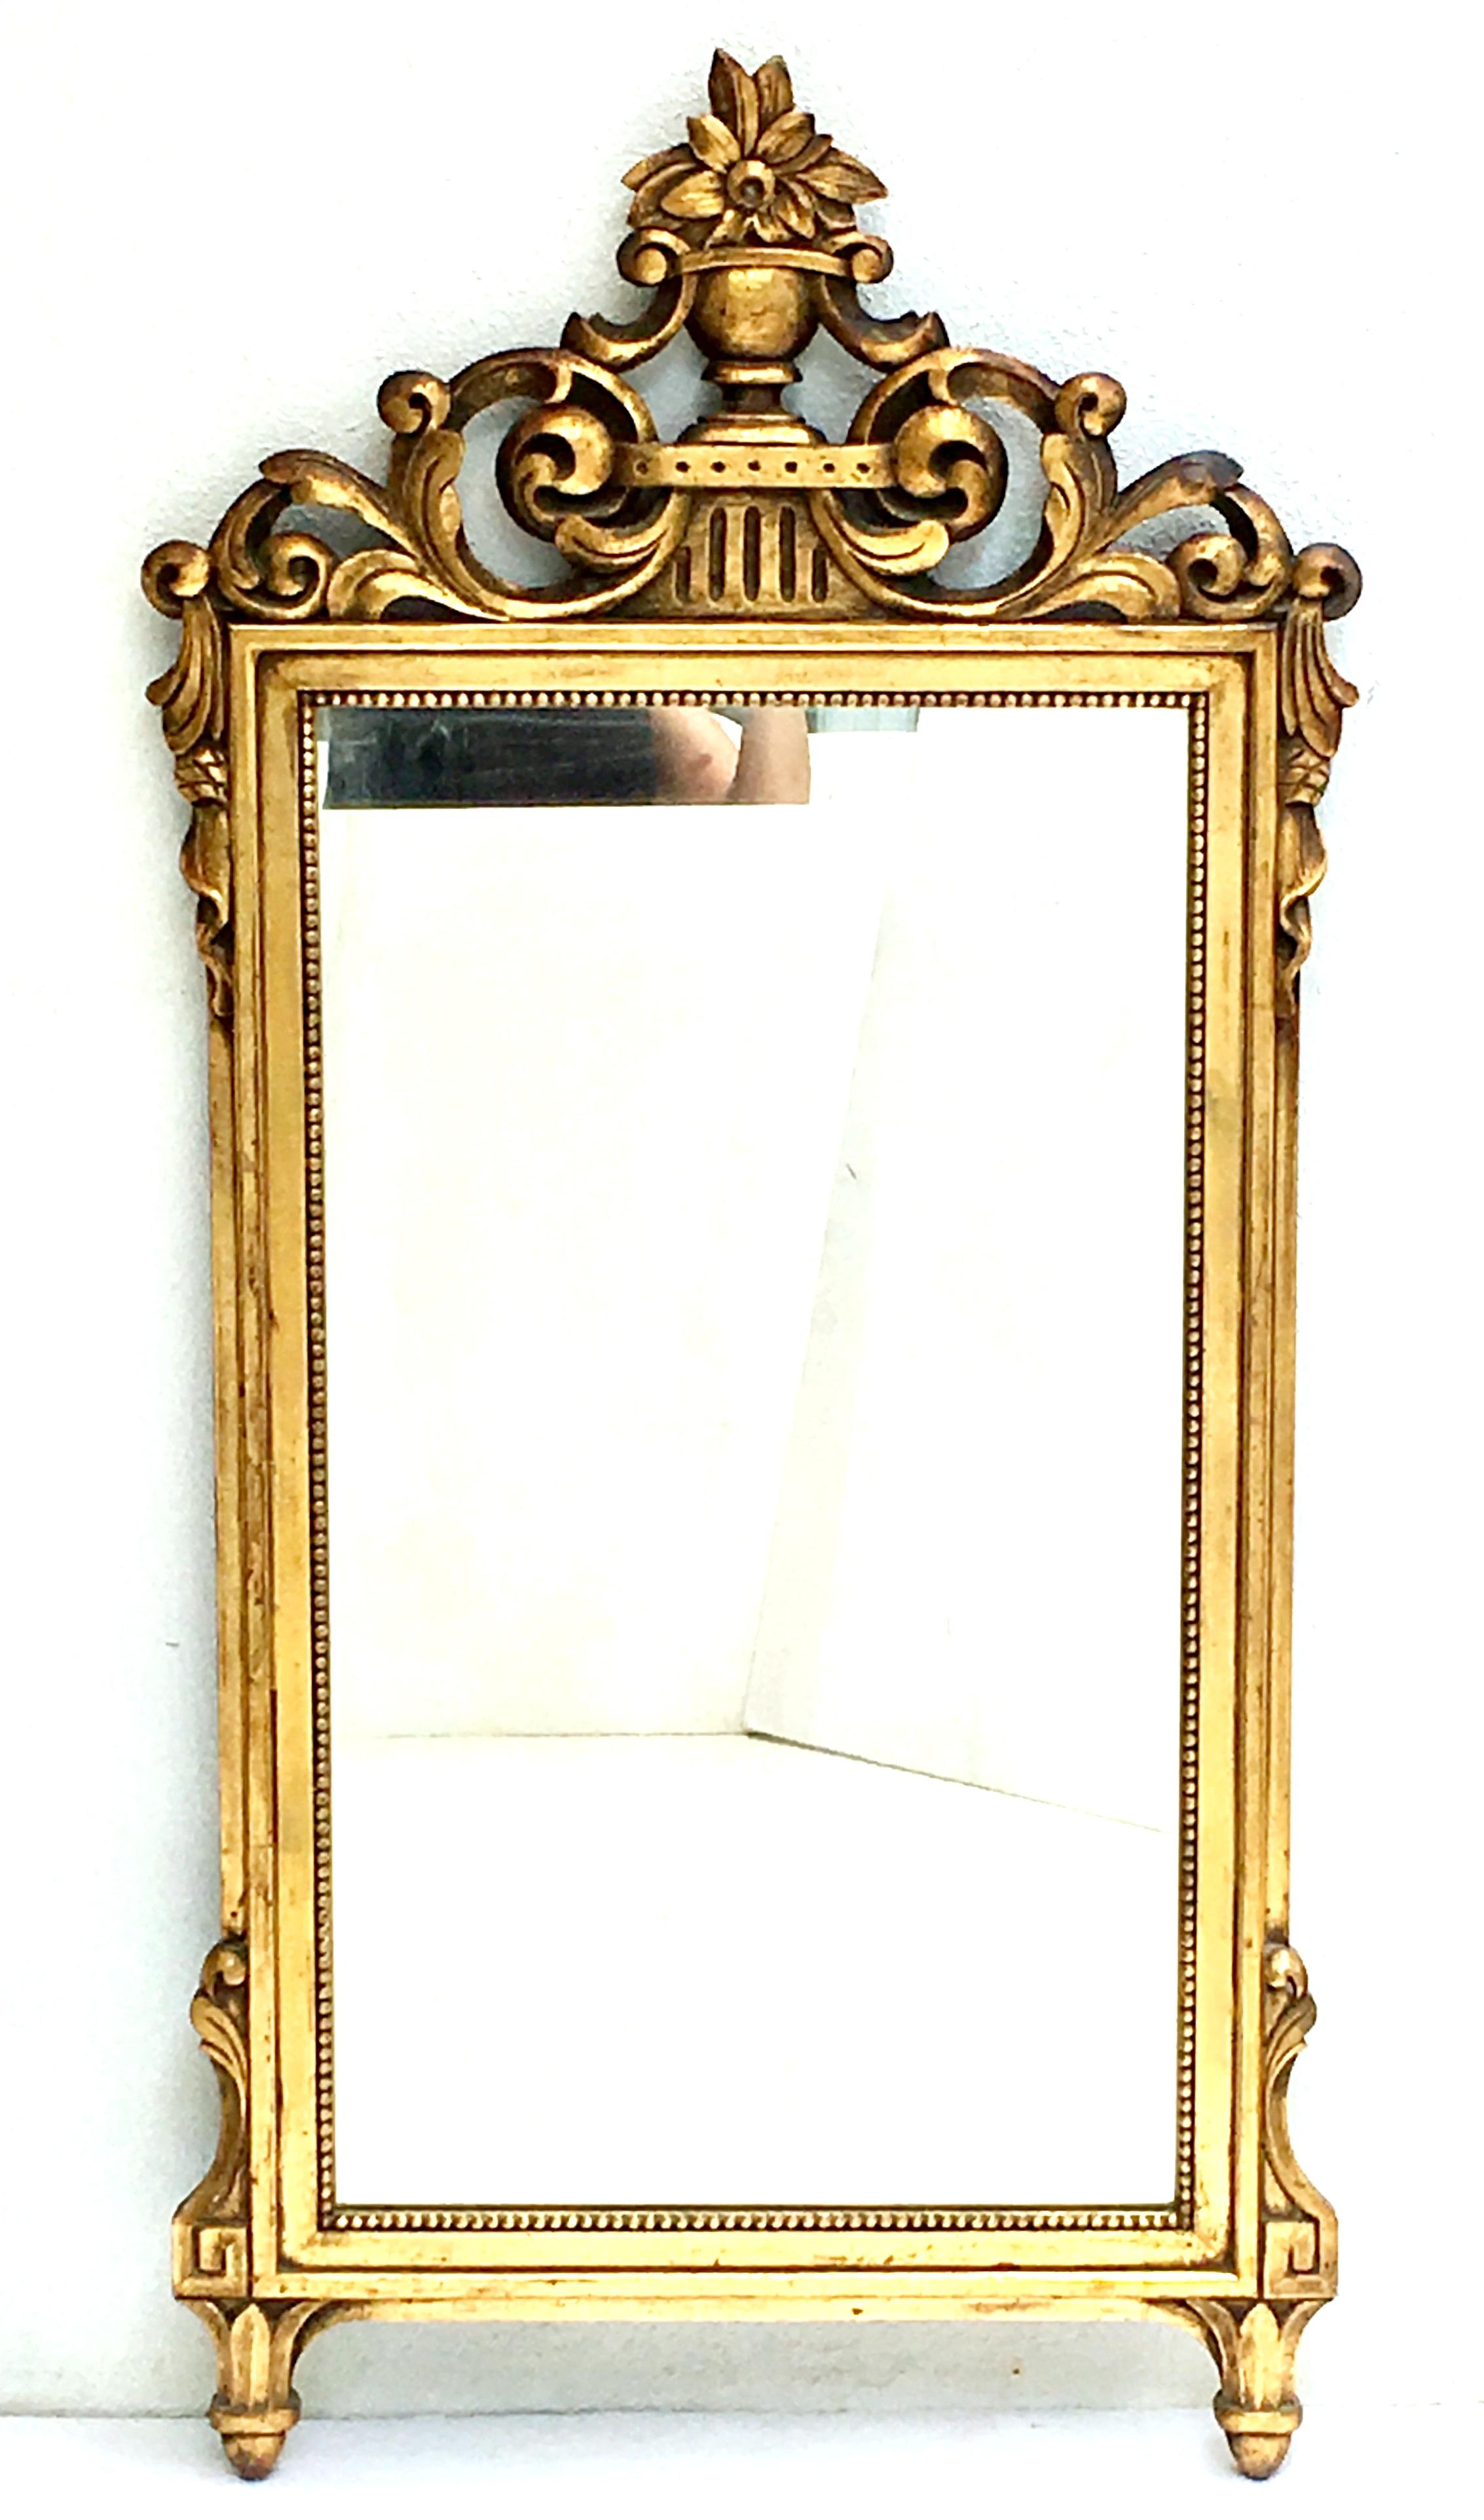 19th Century hand carved walnut gold gilt wood full length mirror in the French Regency style. This substantial, finely crafted hand carved gold gilt frame mirror features a Classic French Regency motif of a central top urn, floral and scroll motif